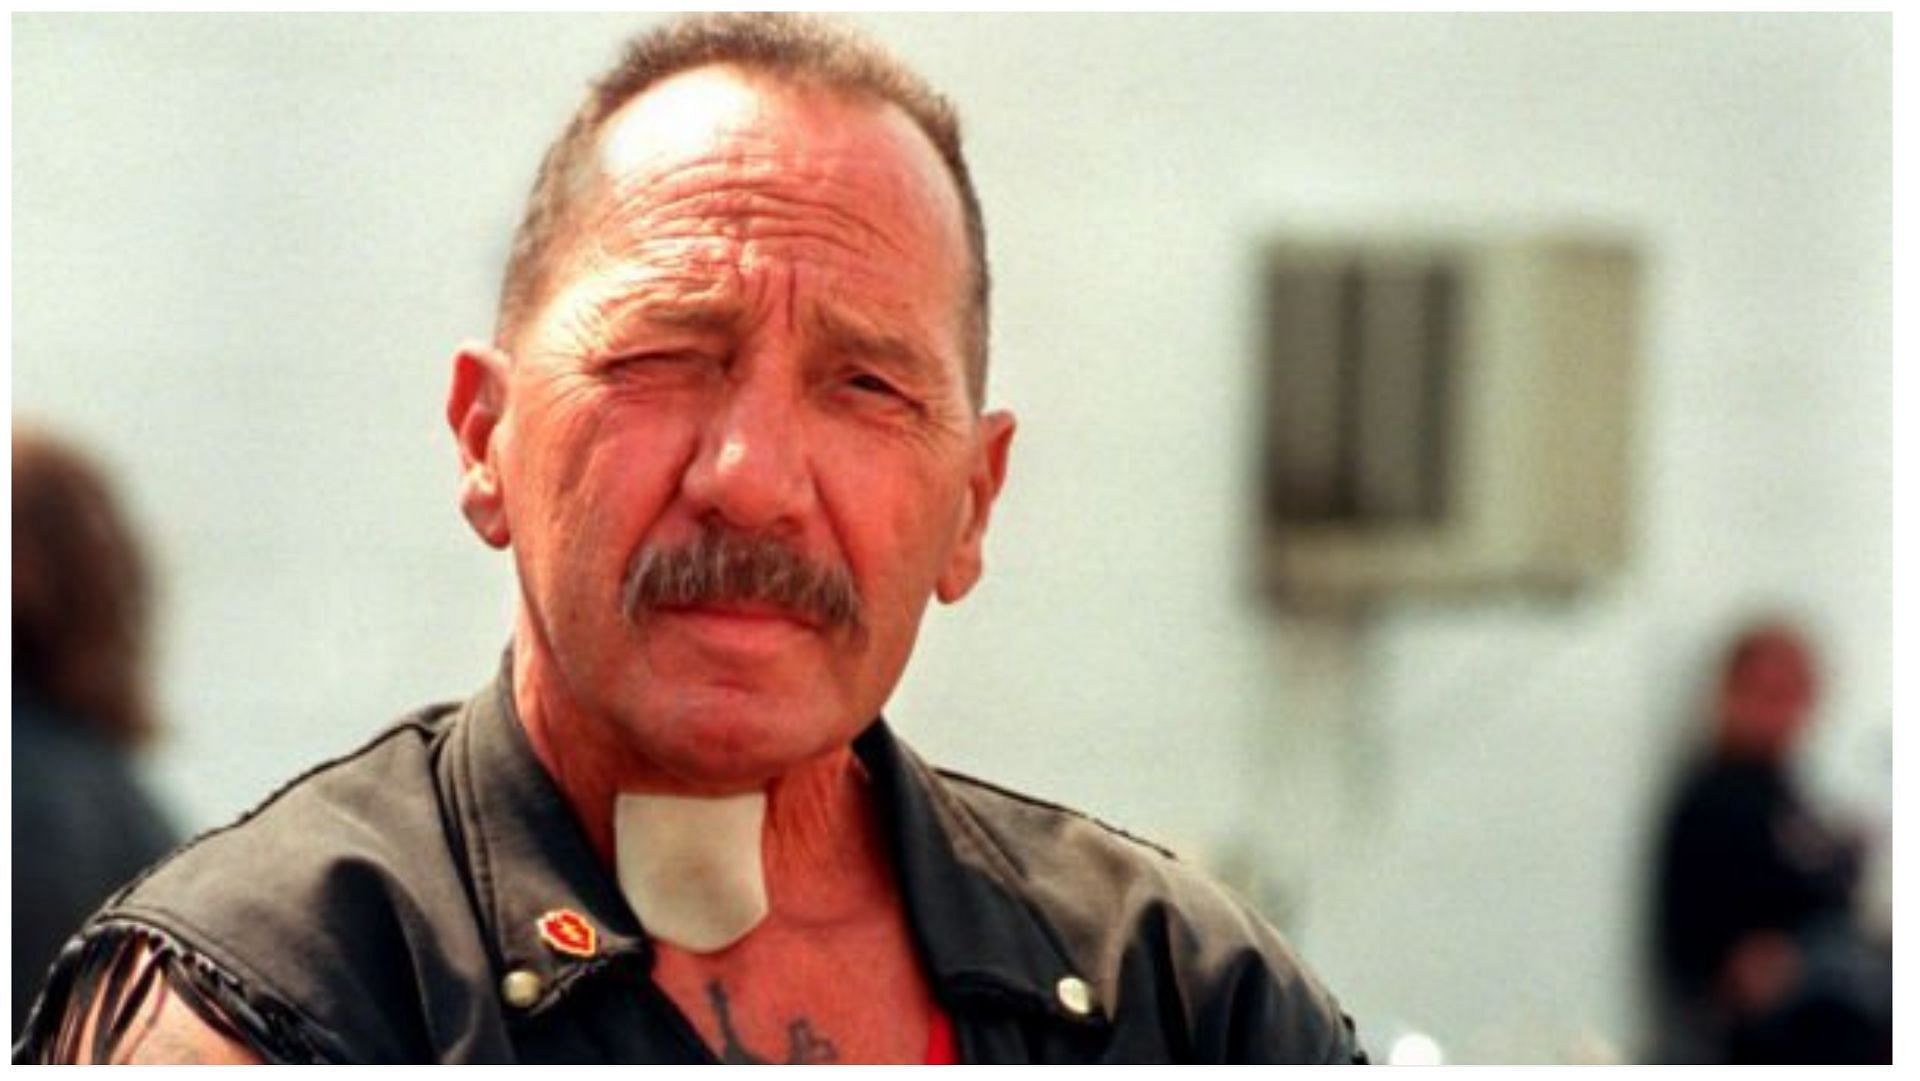 Sonny Barger recently died at the age of 83 (Image via Joey McLeister/Getty Images)